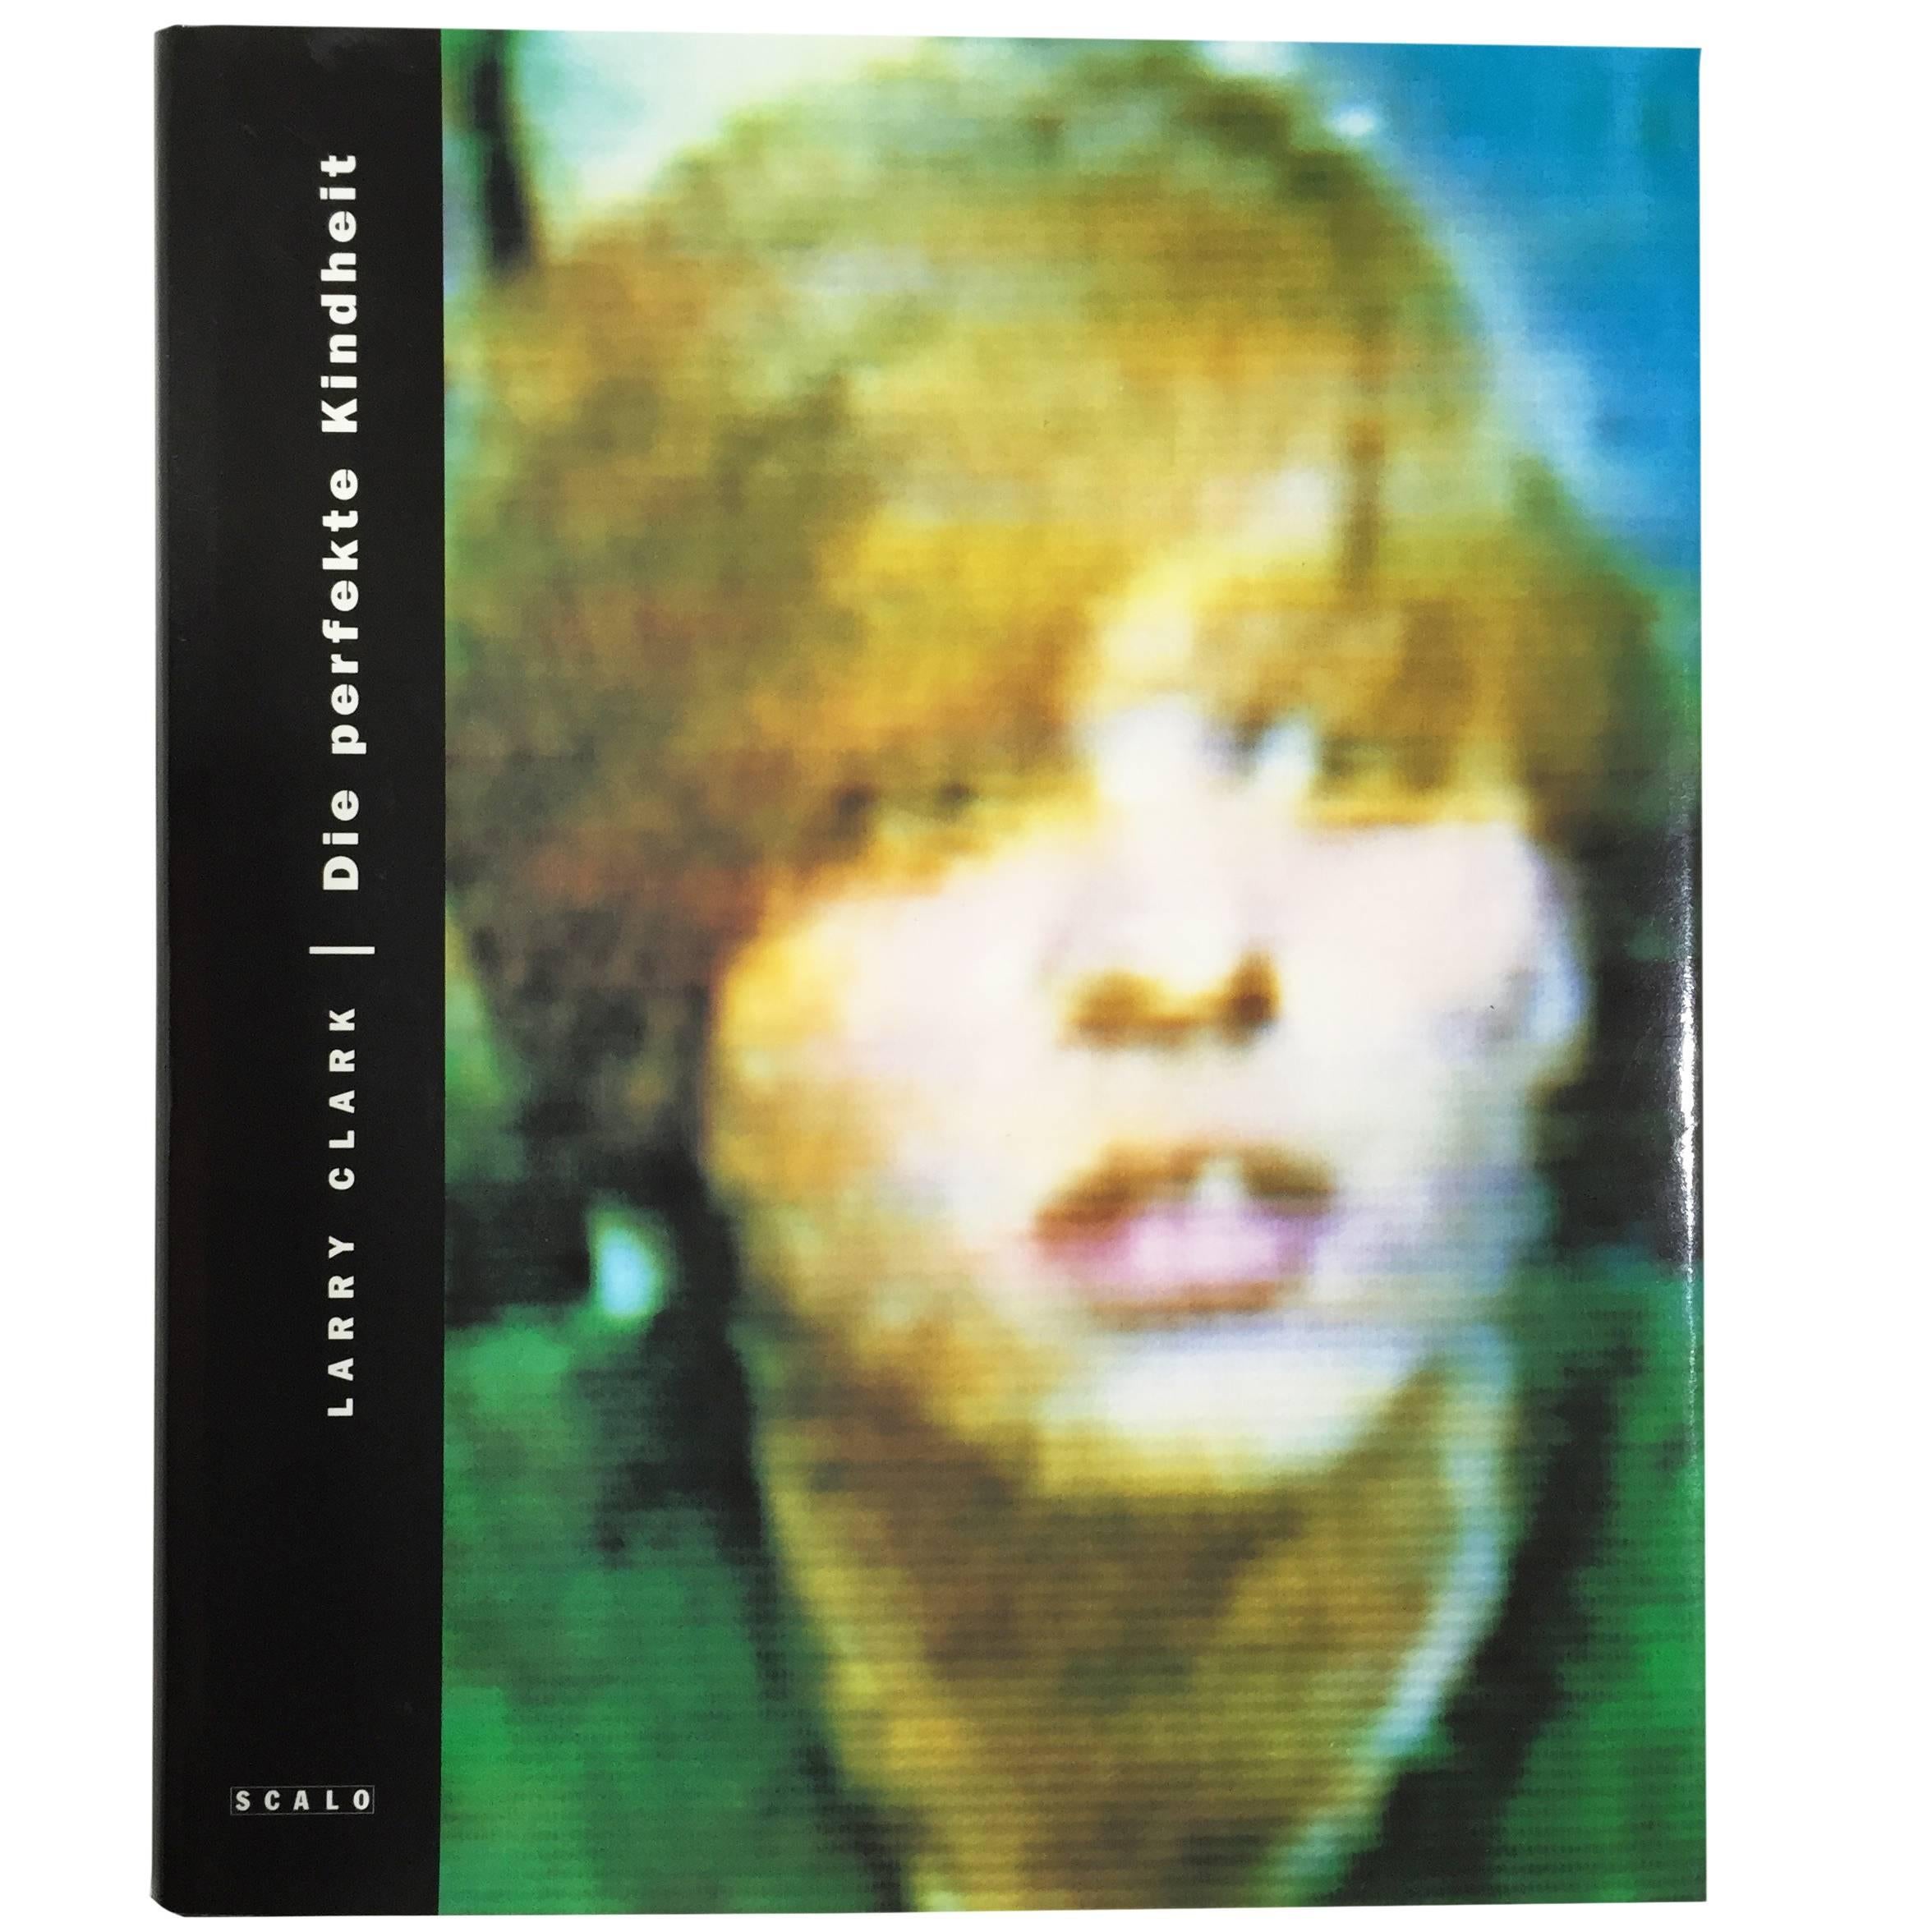 Die Perfekte Kindheit - Larry Clark - 1st Edition, Scalo, 1993 For Sale